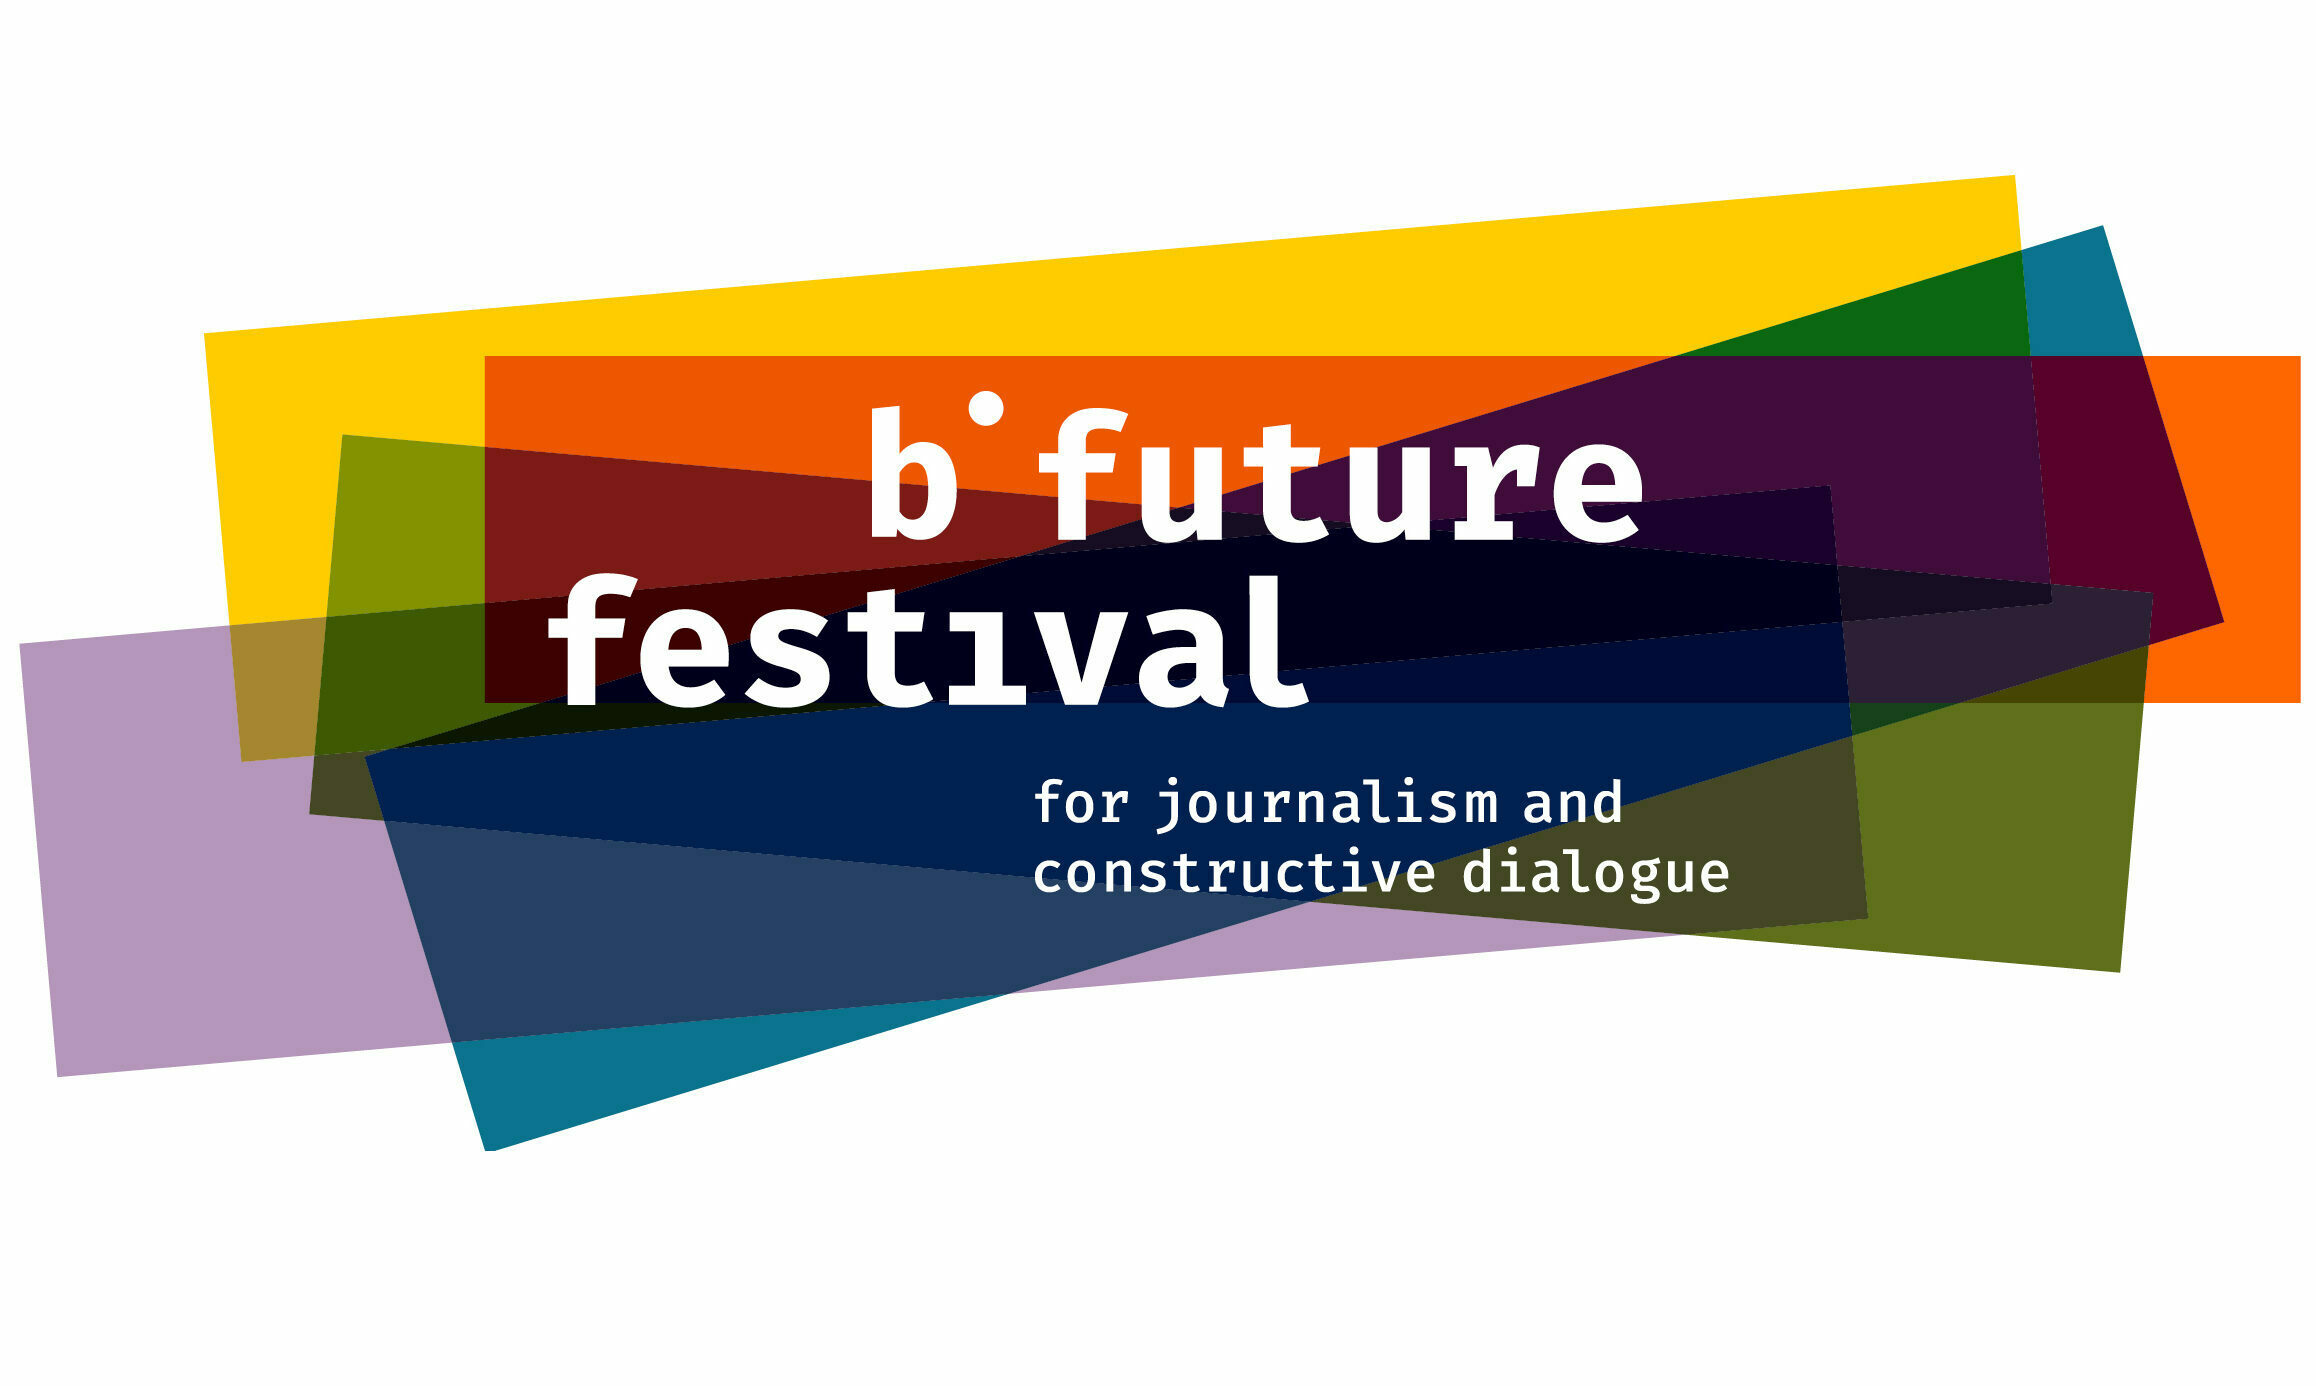 official b future festival logo with white lettering on skewed rectangles with the colours yellow, orange, green, blue and a light purple.